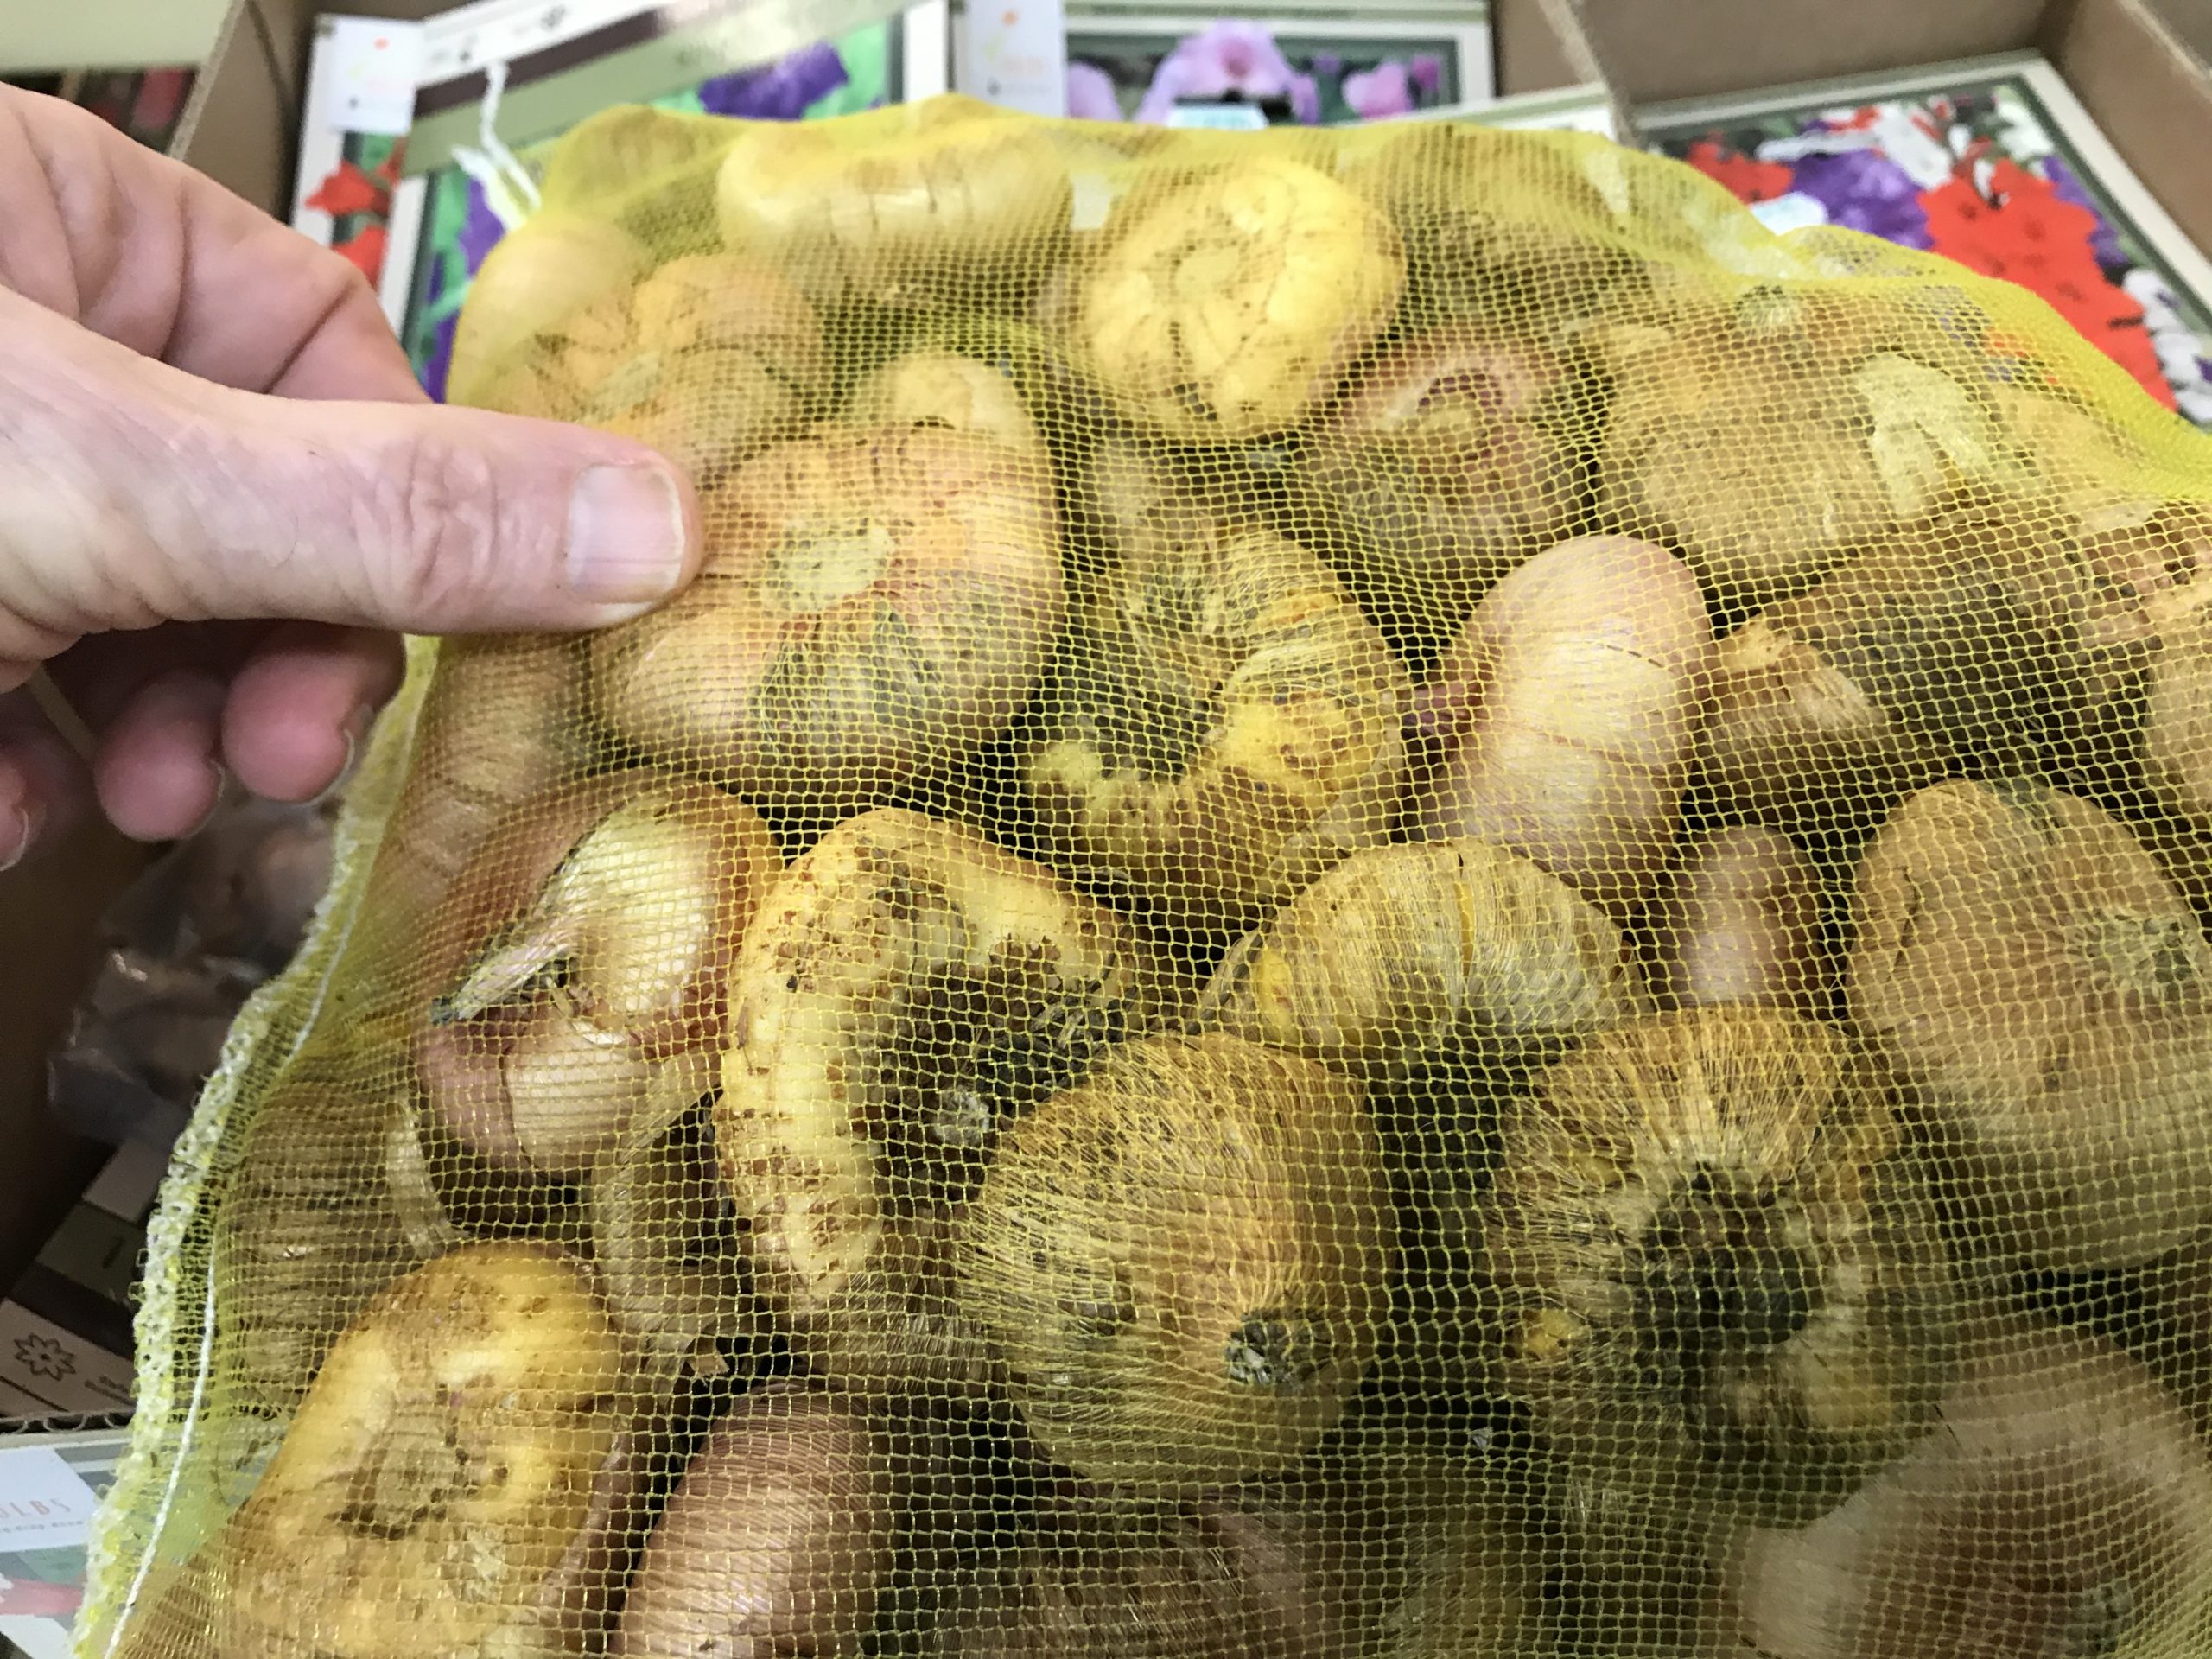 These mixed glad corms were on sale at a garden center in a bulk bag for about 30 cents each.  The corms were surprisingly large for the price so a good deal for the cutting garden.